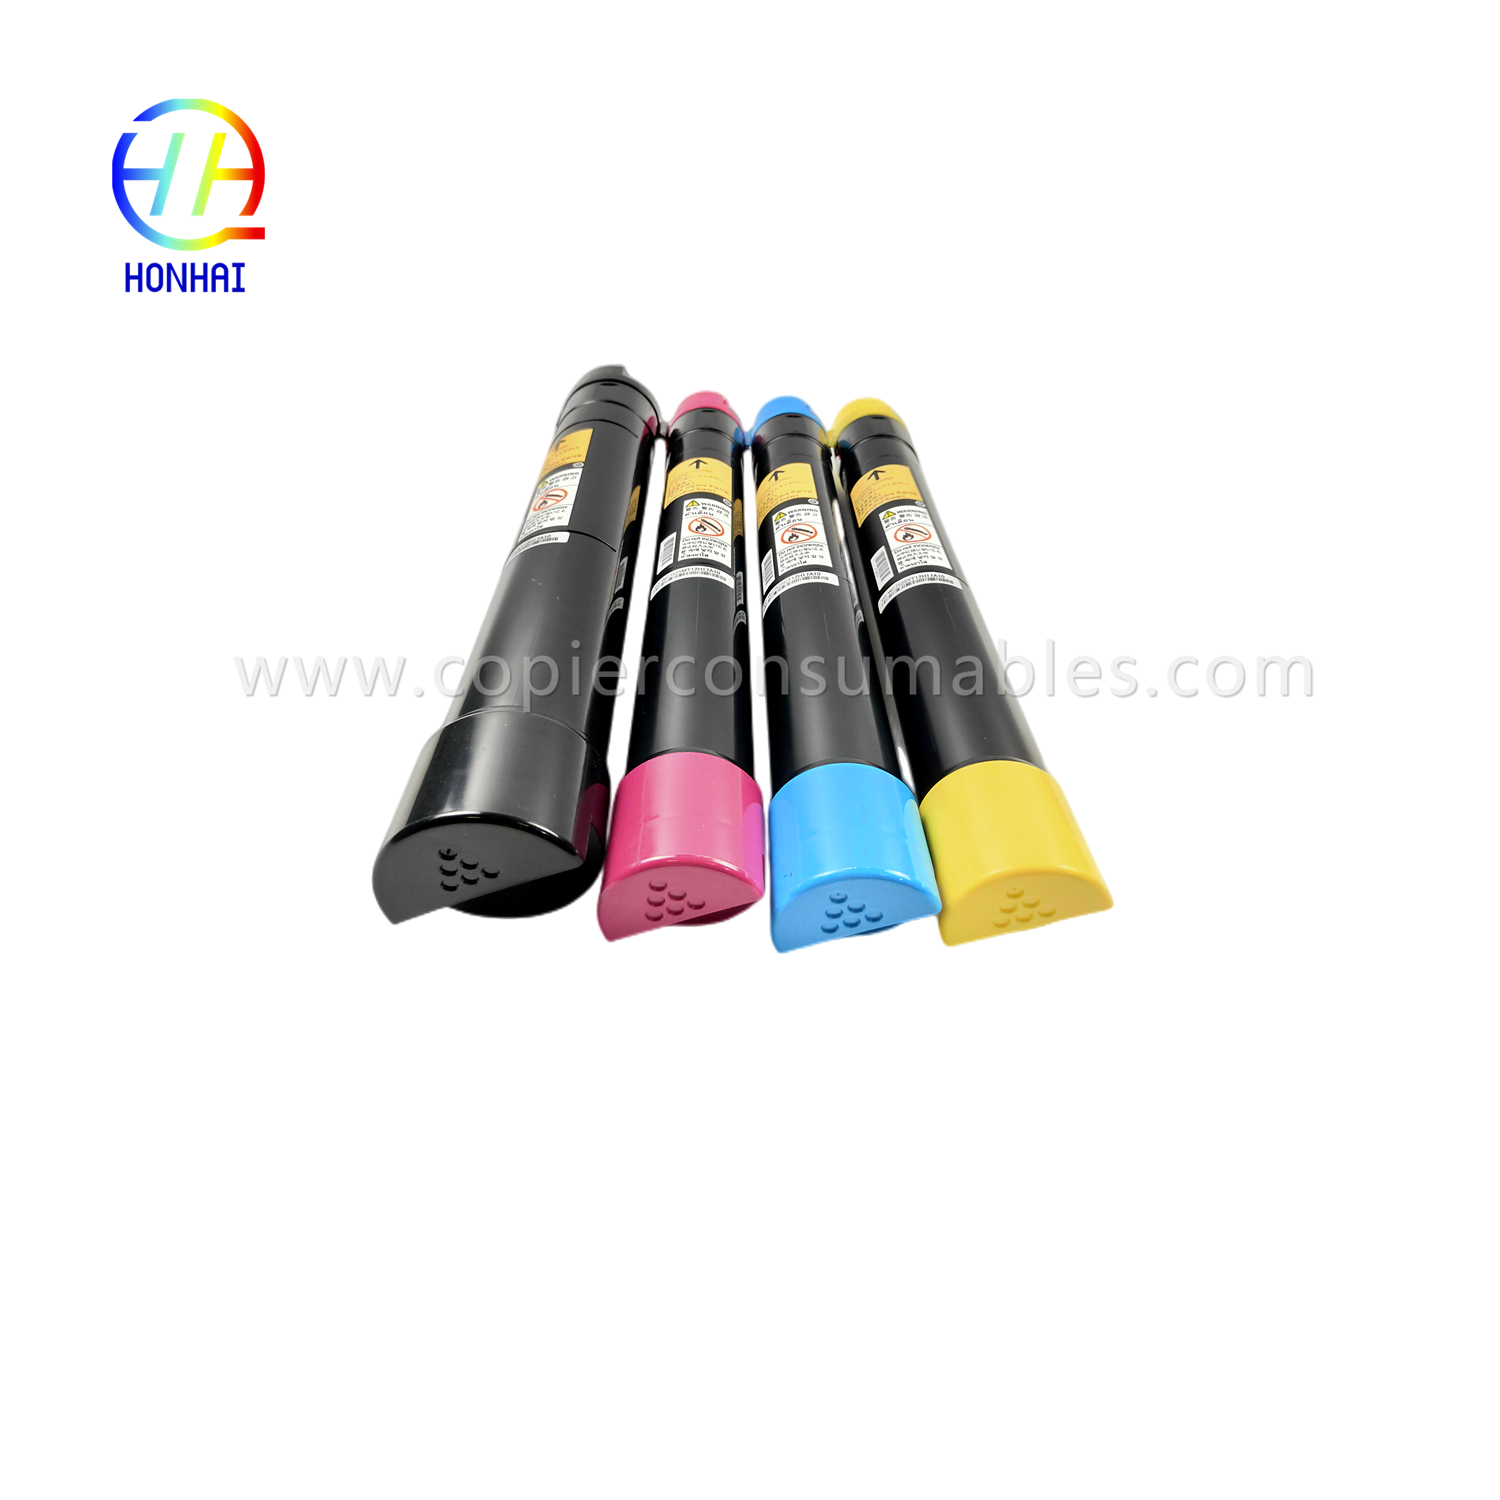 https://www.copierconsumables.com/toner-cartridge-imported-powder-set-bcmy-for-xerox-workcentre-7830-7835-7845-7855-7970-7525-7530-7535-7545-7556-006r01513-006r01514-006r01515-006r01516-product/